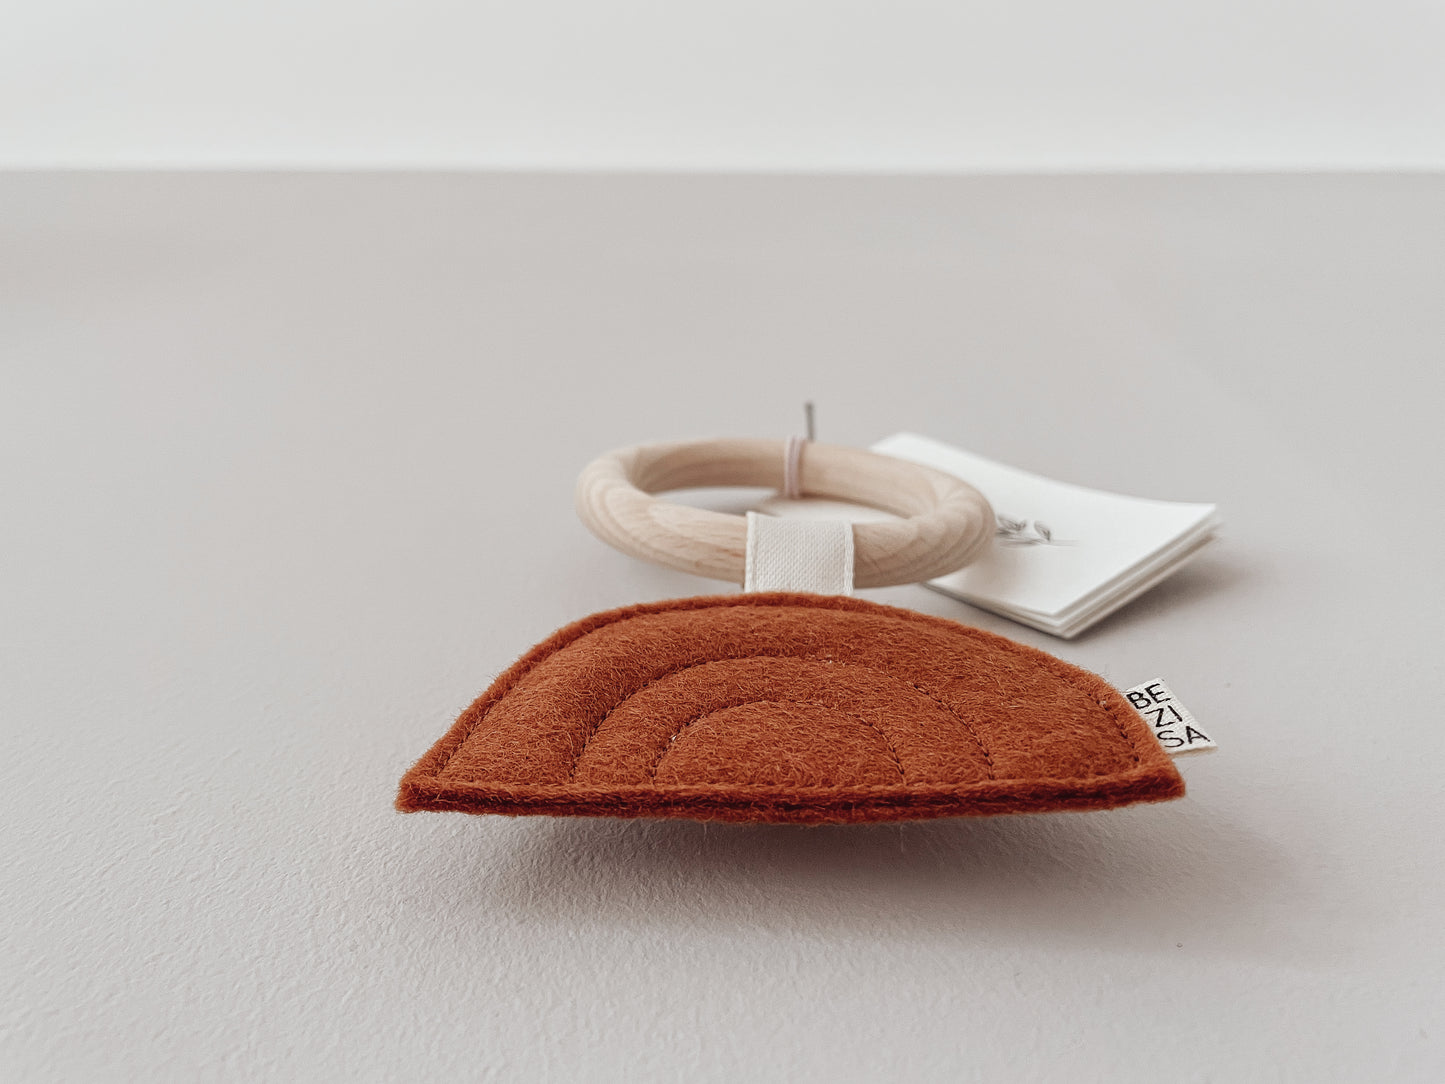 Bezisa Sunset teether in rust colour with wooden teething ring, photographed on a plain neutral background.